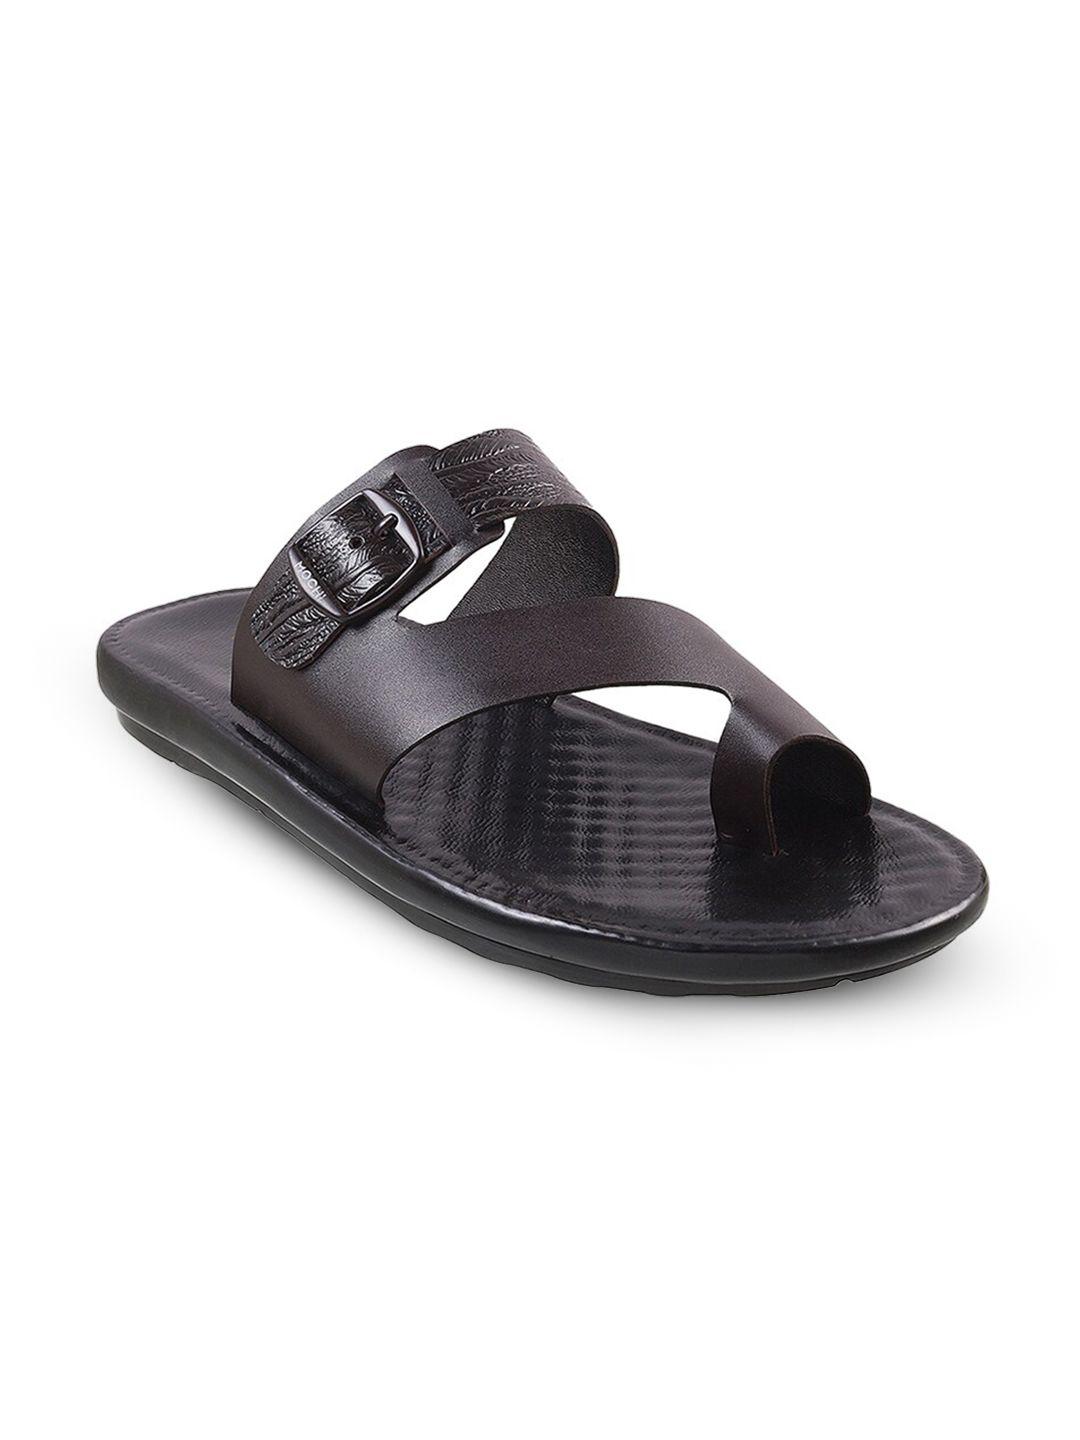 mochi men one toe comfort sandals with buckle detail